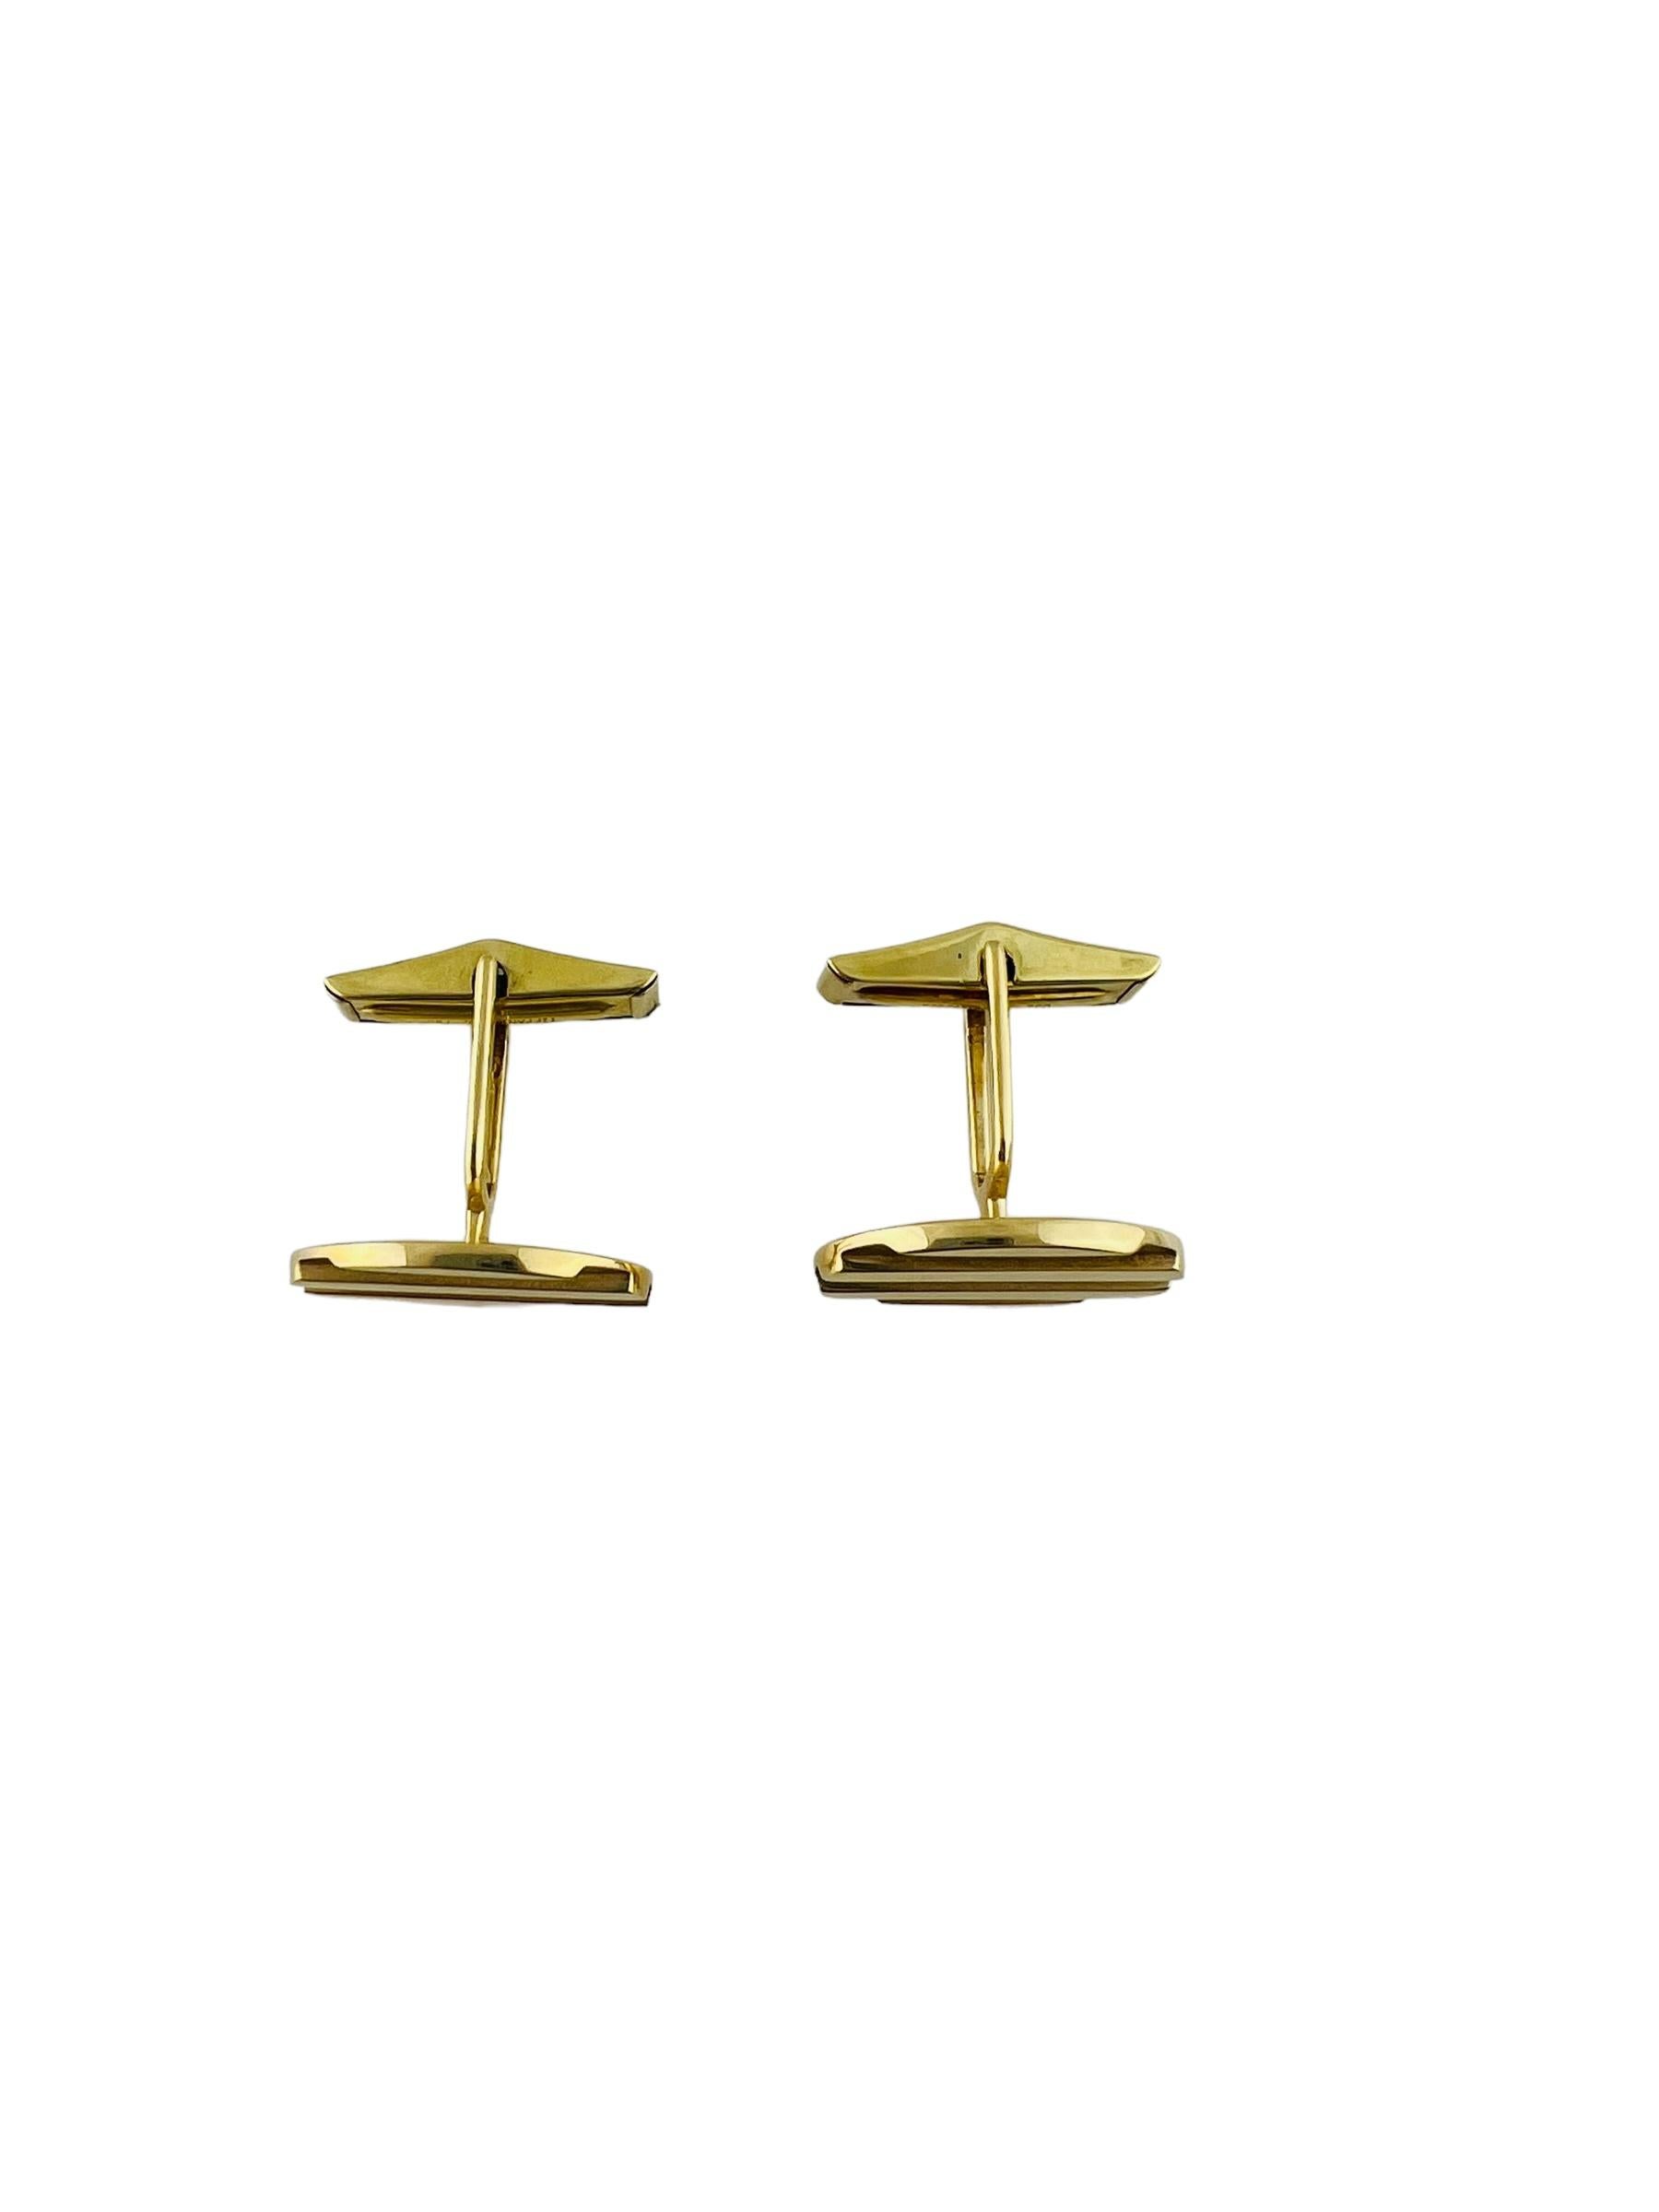 1995 Tiffany & Co. 18k Yellow Gold Oval Striped Cufflinks with Box In Good Condition For Sale In Washington Depot, CT